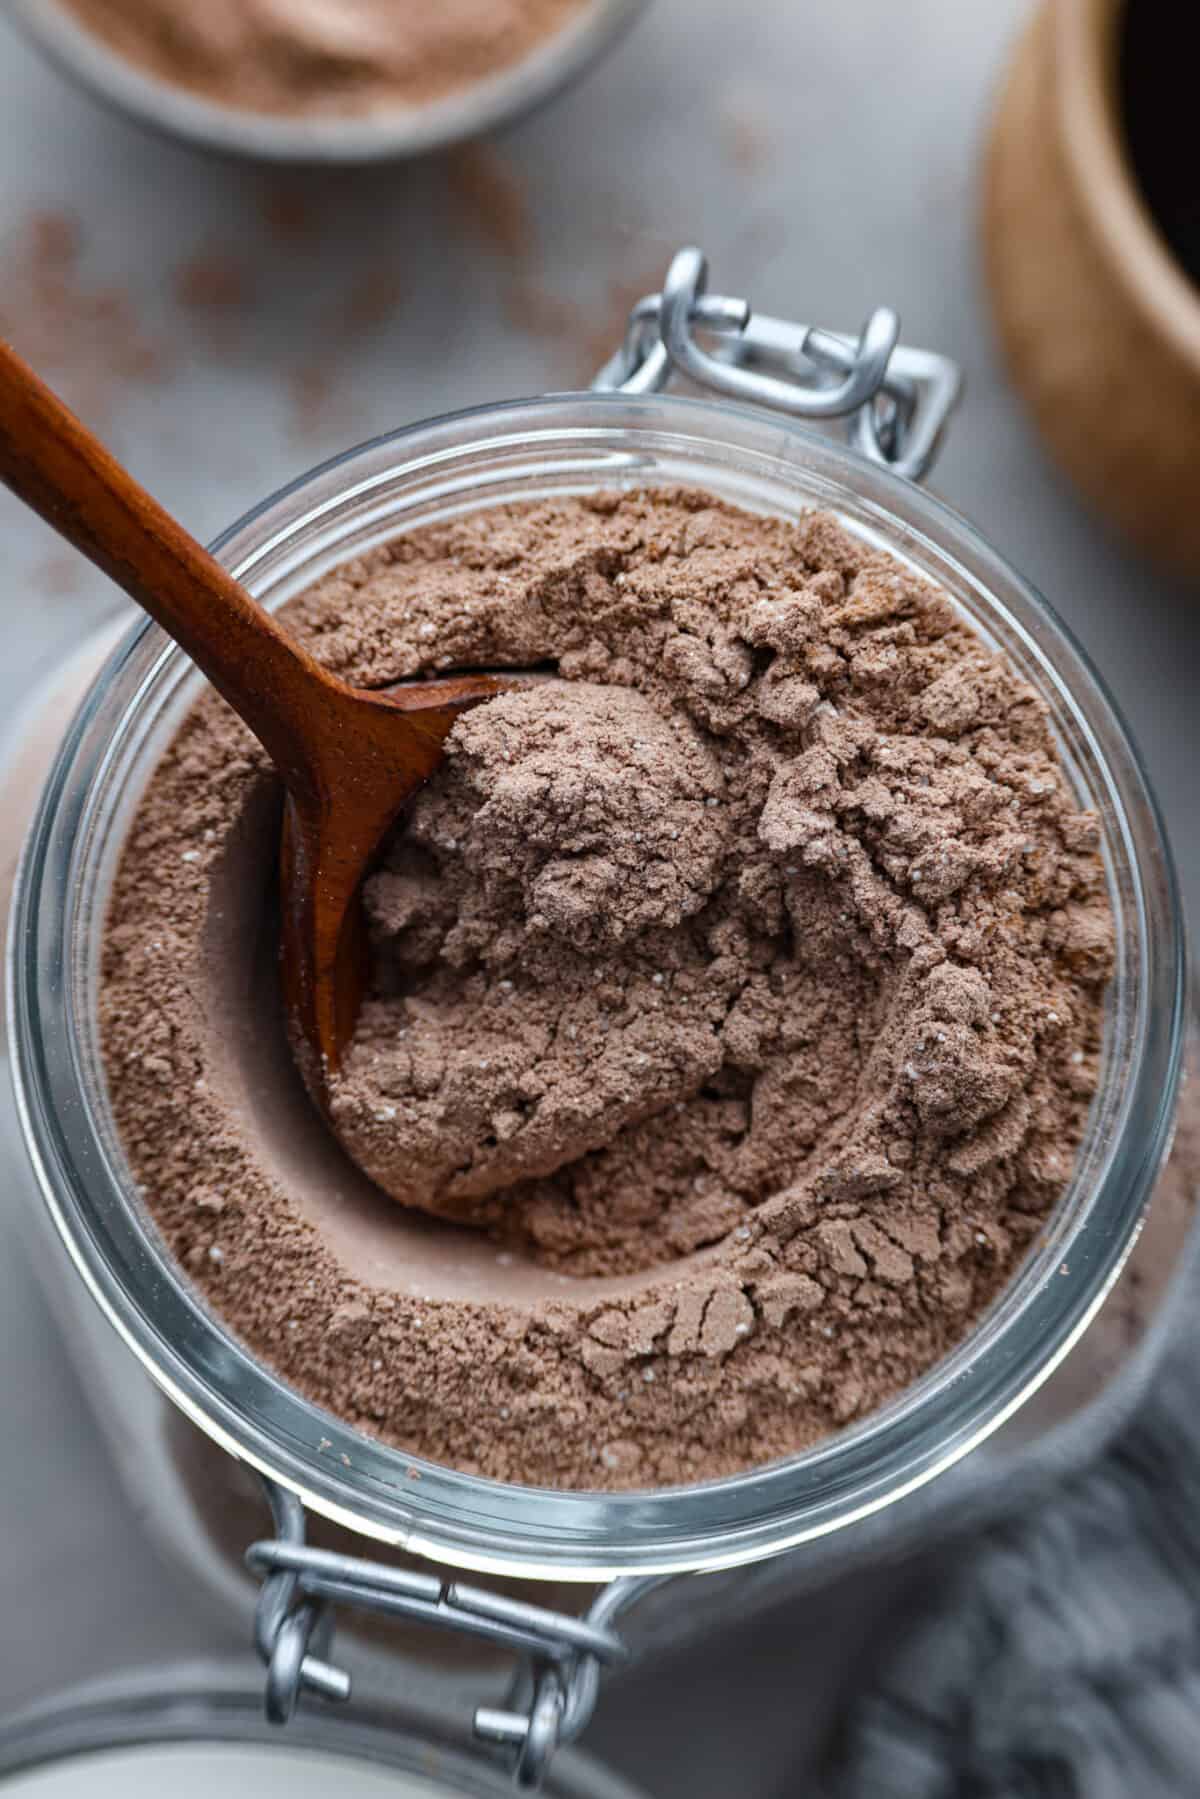 Top-down view of hot chocolate mix in a glass jar, being mixed with a wooden spoon.